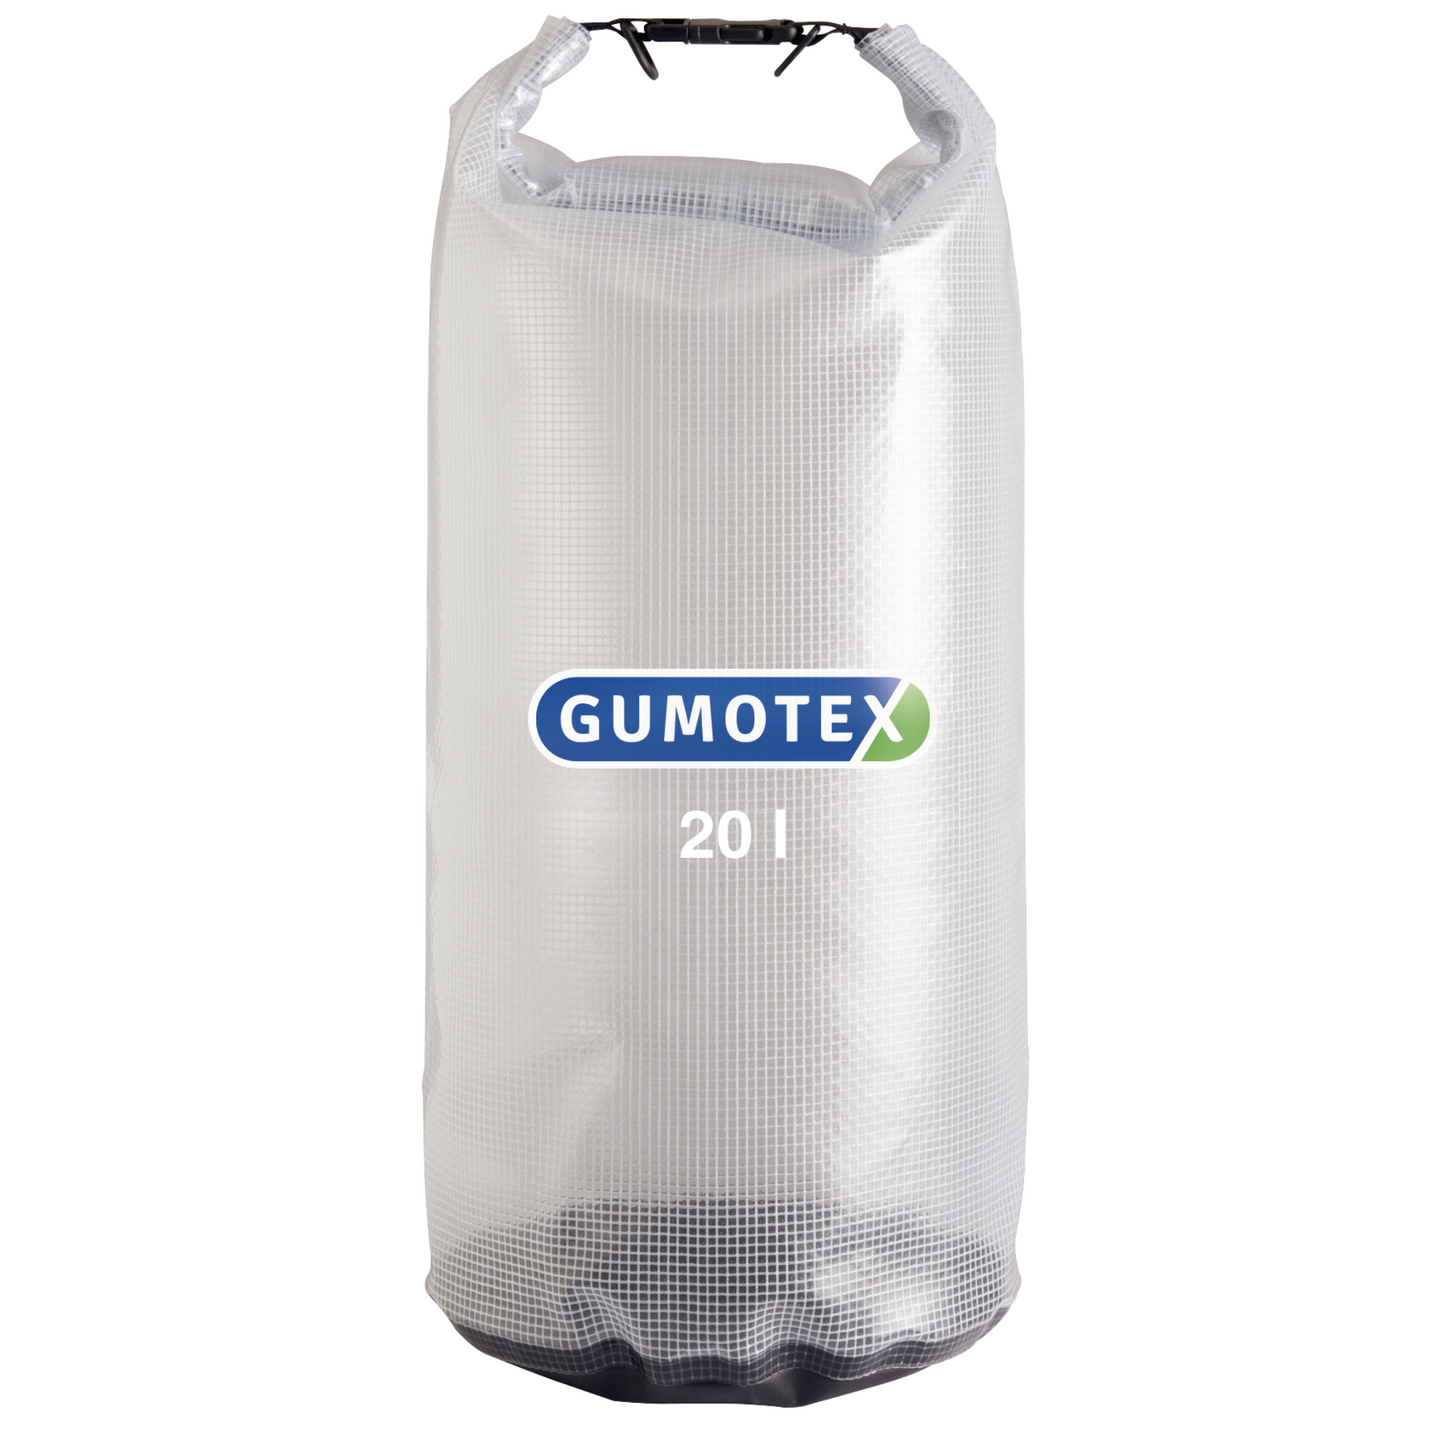 Drybag for small items 20 L